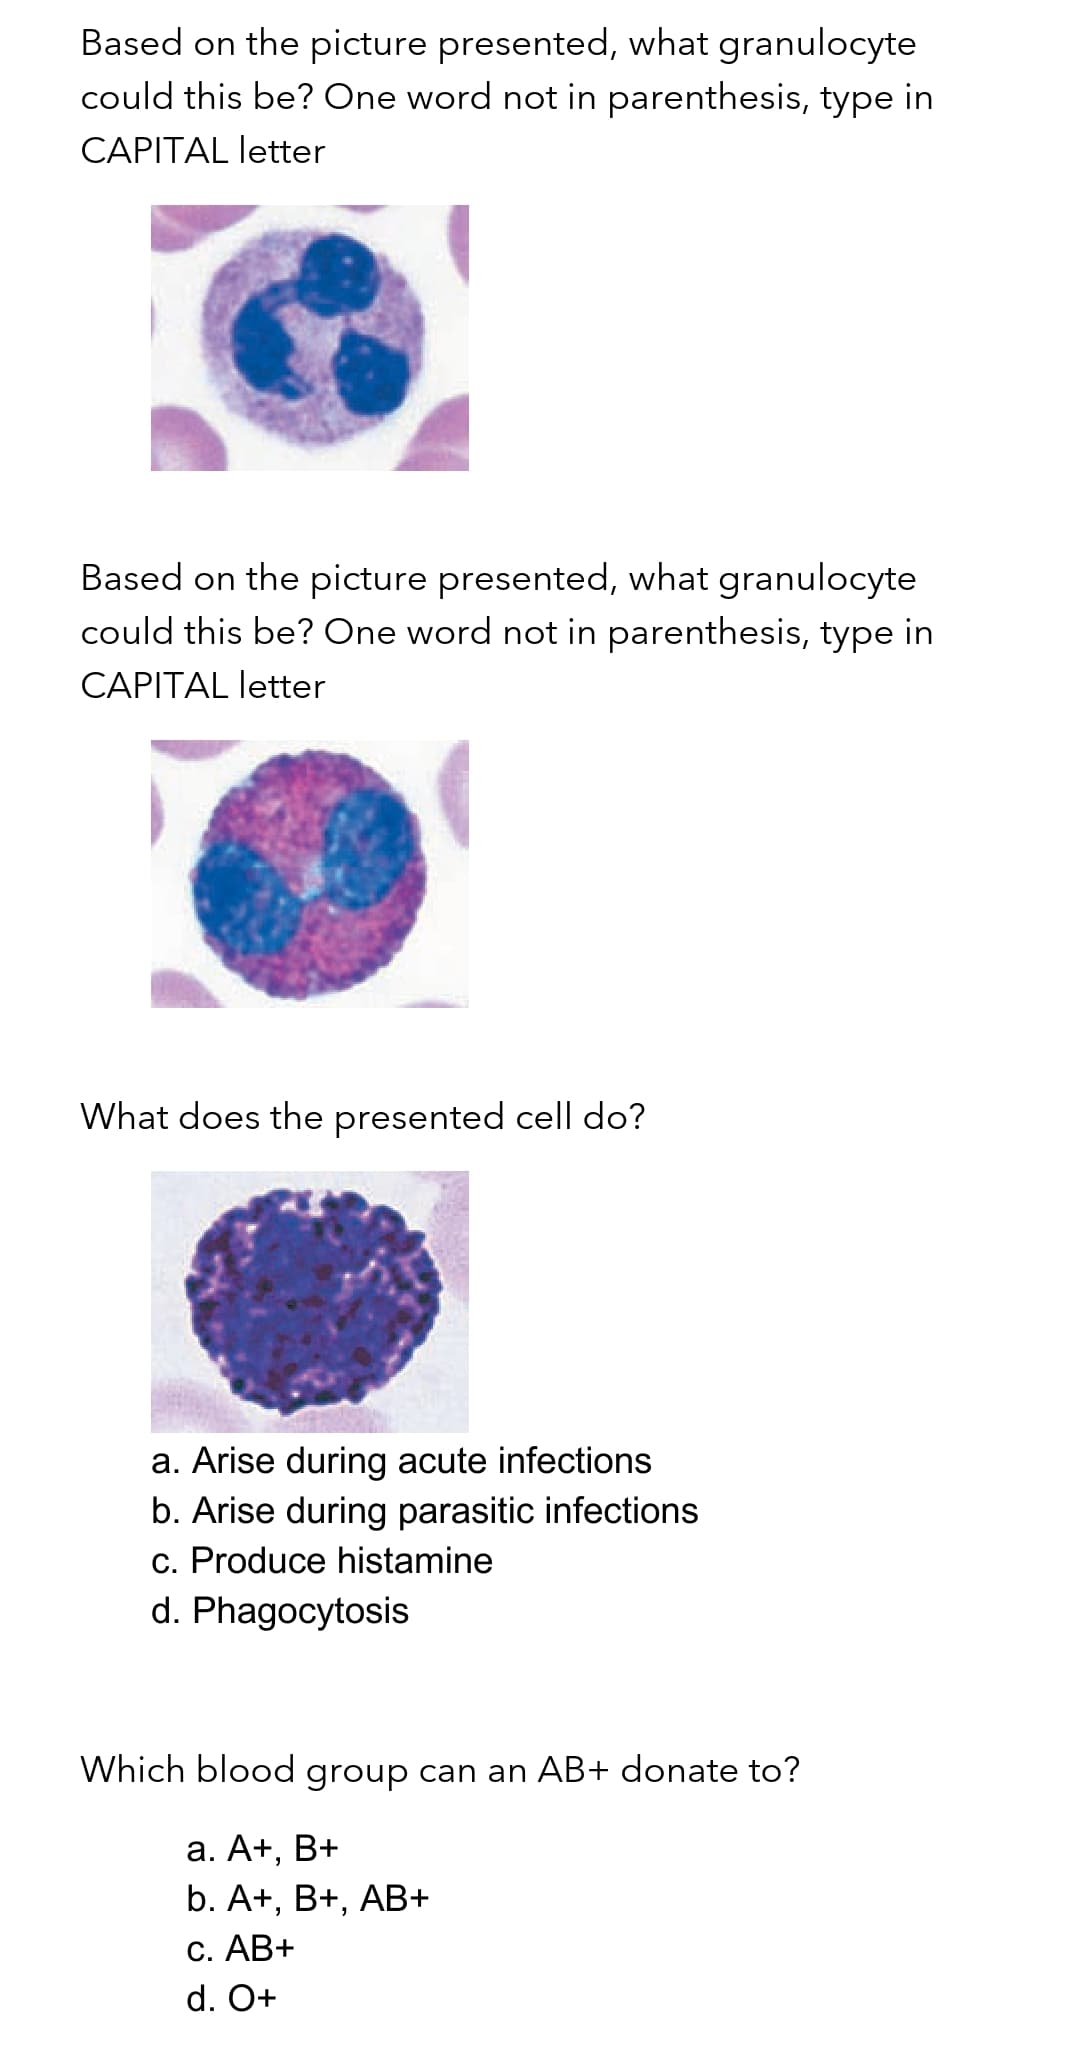 Based on the picture presented, what granulocyte
could this be? One word not in parenthesis, type in
CAPITAL letter
Based on the picture presented, what granulocyte
could this be? One word not in parenthesis, type in
CAPITAL letter
What does the presented cell do?
a. Arise during acute infections
b. Arise during parasitic infections
c. Produce histamine
d. Phagocytosis
Which blood group can an AB+ donate to?
a. A+,
B+
b. A+, B+, AB+
C. AB+
d. O+